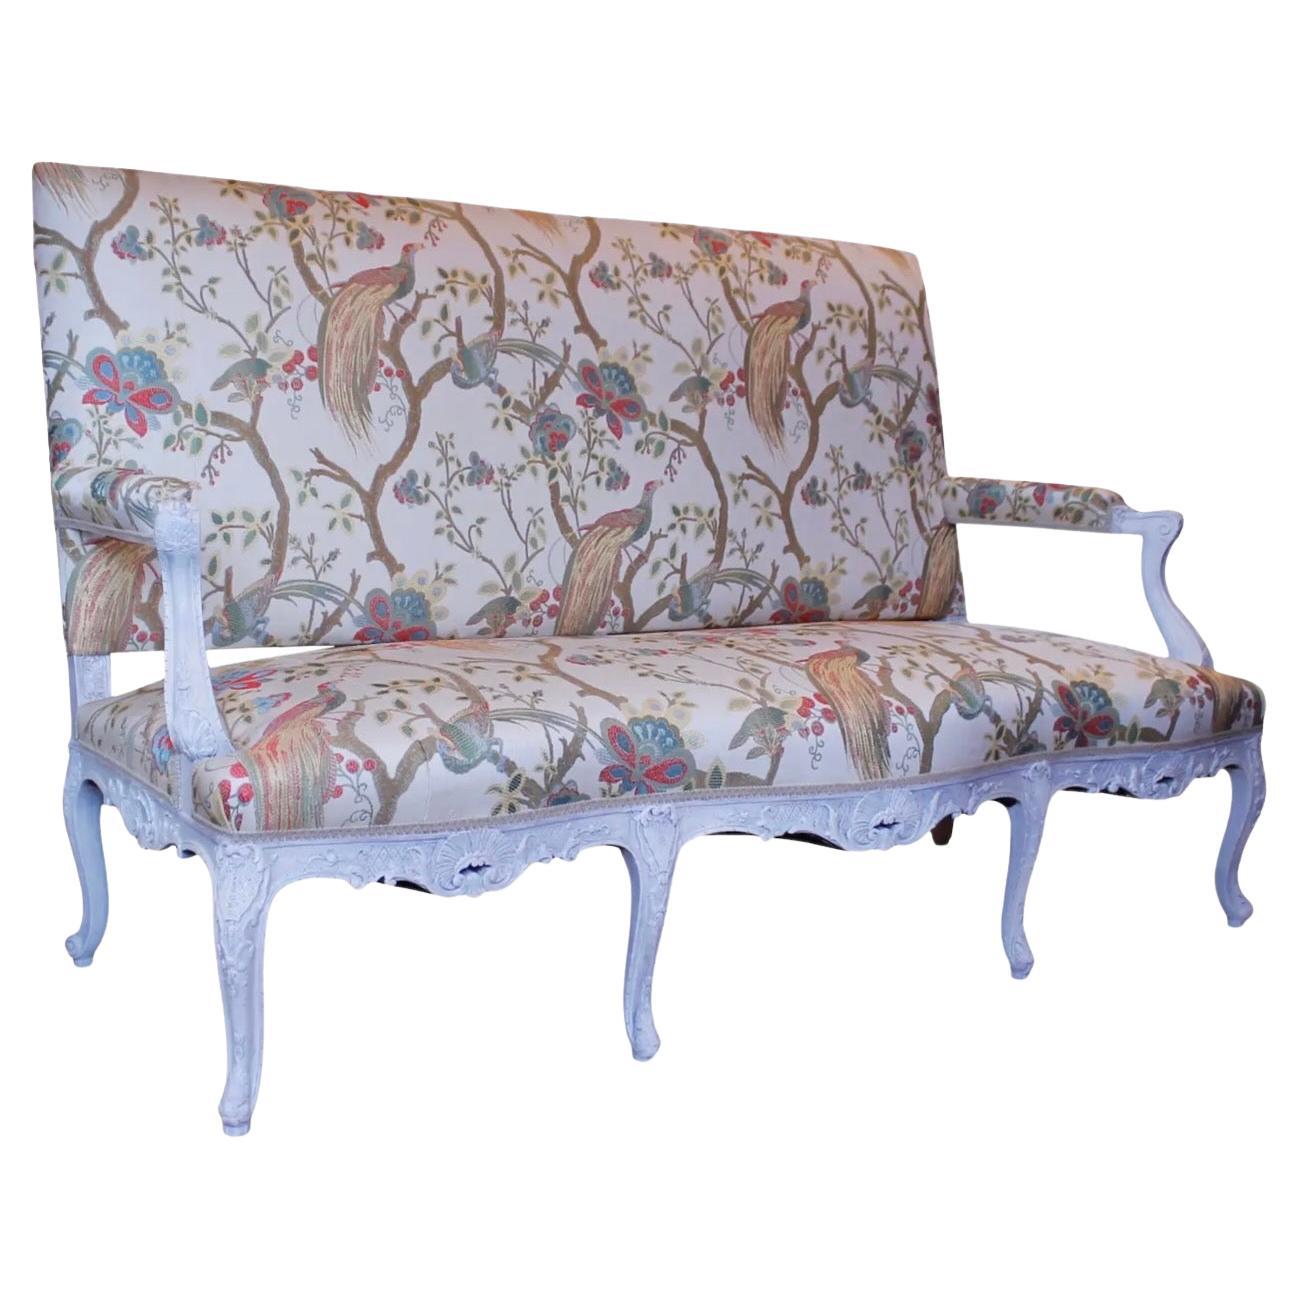 Antique Painted French Régence Style Sofa Or Settee For Sale